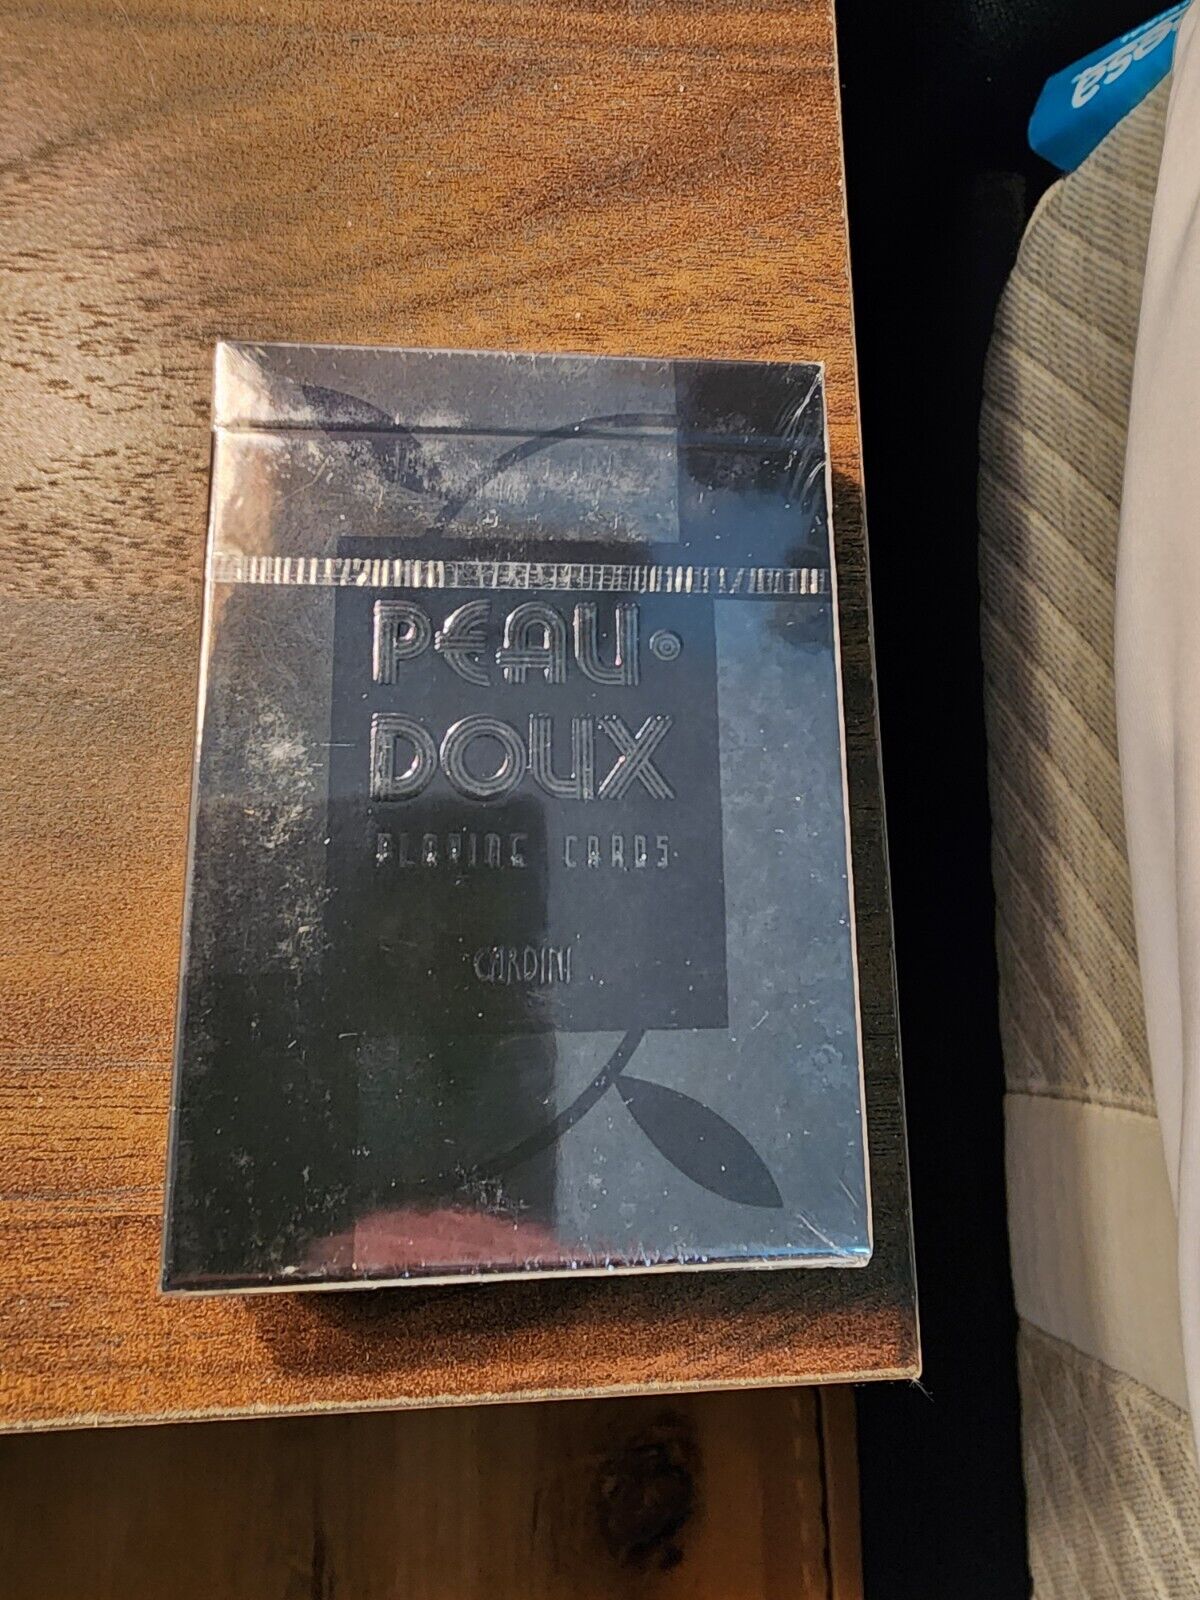 PEAU DOUX Deco Back Playing Cards- Art Of Play. EXTREMELY RARE